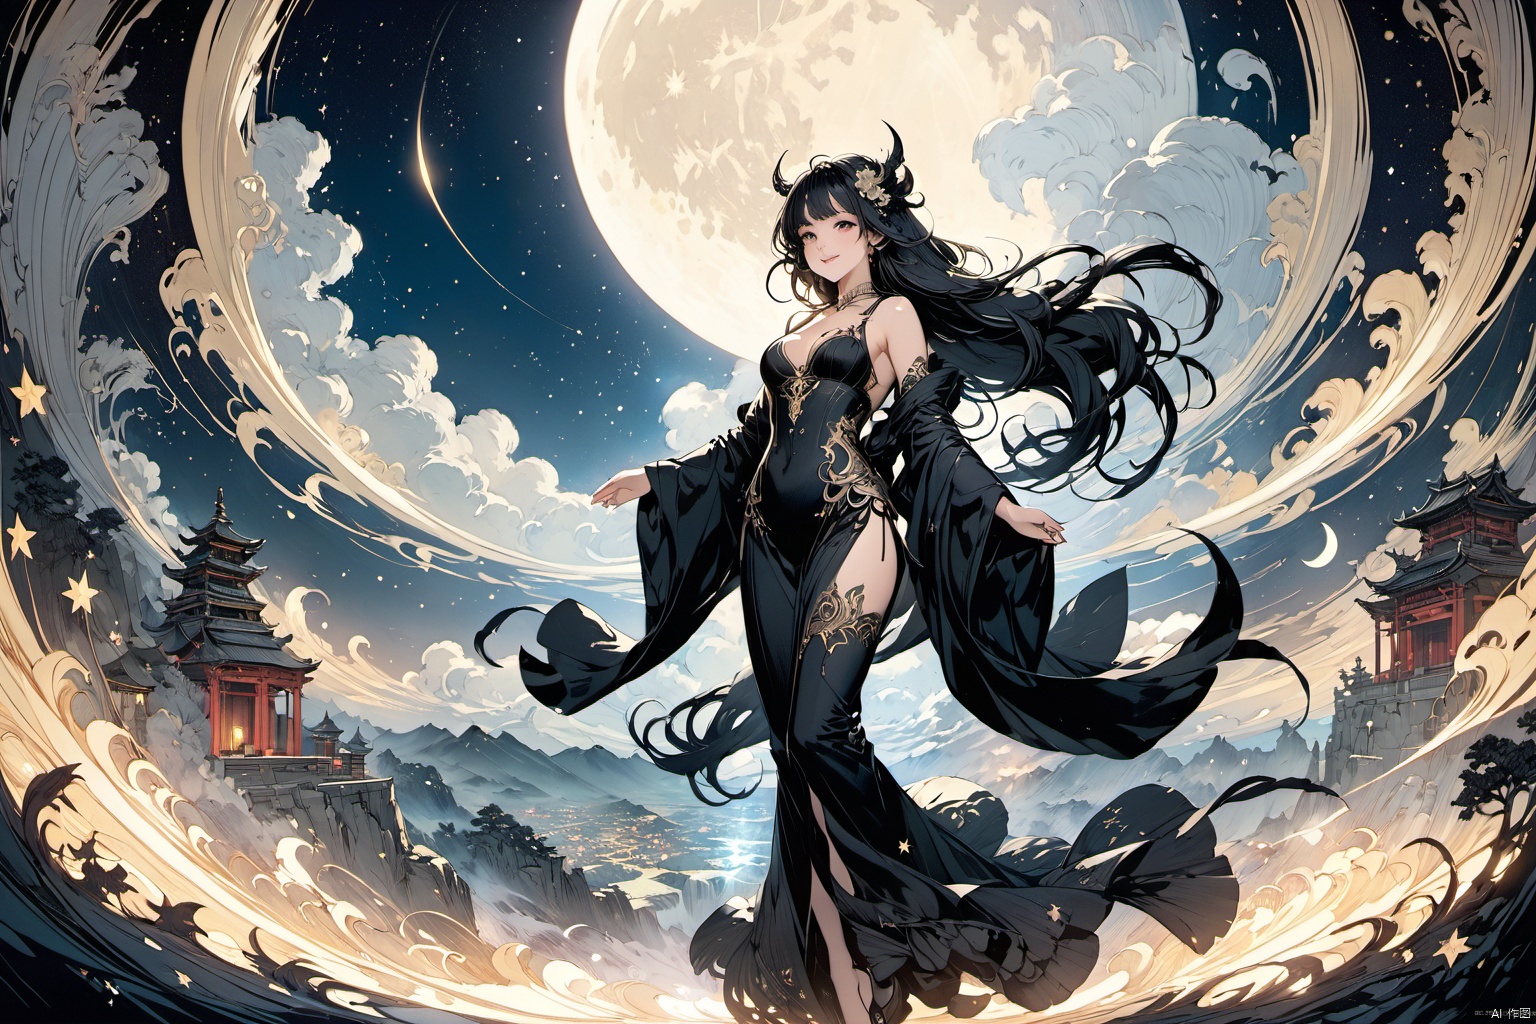 ultra-detailed,(best quality),((masterpiece)),(highres),original,extremely detailed 8K wallpaper,(an extremely delicate and beautiful),anime,  (full body  , solo), black  theme, 

An epic fantasy illustration featuring a succubus with striking long hair and captivating eyes, enchanting all who behold her with a mesmerizing smile. The scene is set against a starlit sky with a crescent moon, bathed in cinematic lighting effects to enhance the storytelling ambiance. Drawing inspiration from the vibrant and unique character designs of Yoshitaka Amano, the artwork showcases a colorful palette, intricate background details, dynamic composition, and rich emotional expressions that bring the character to life.